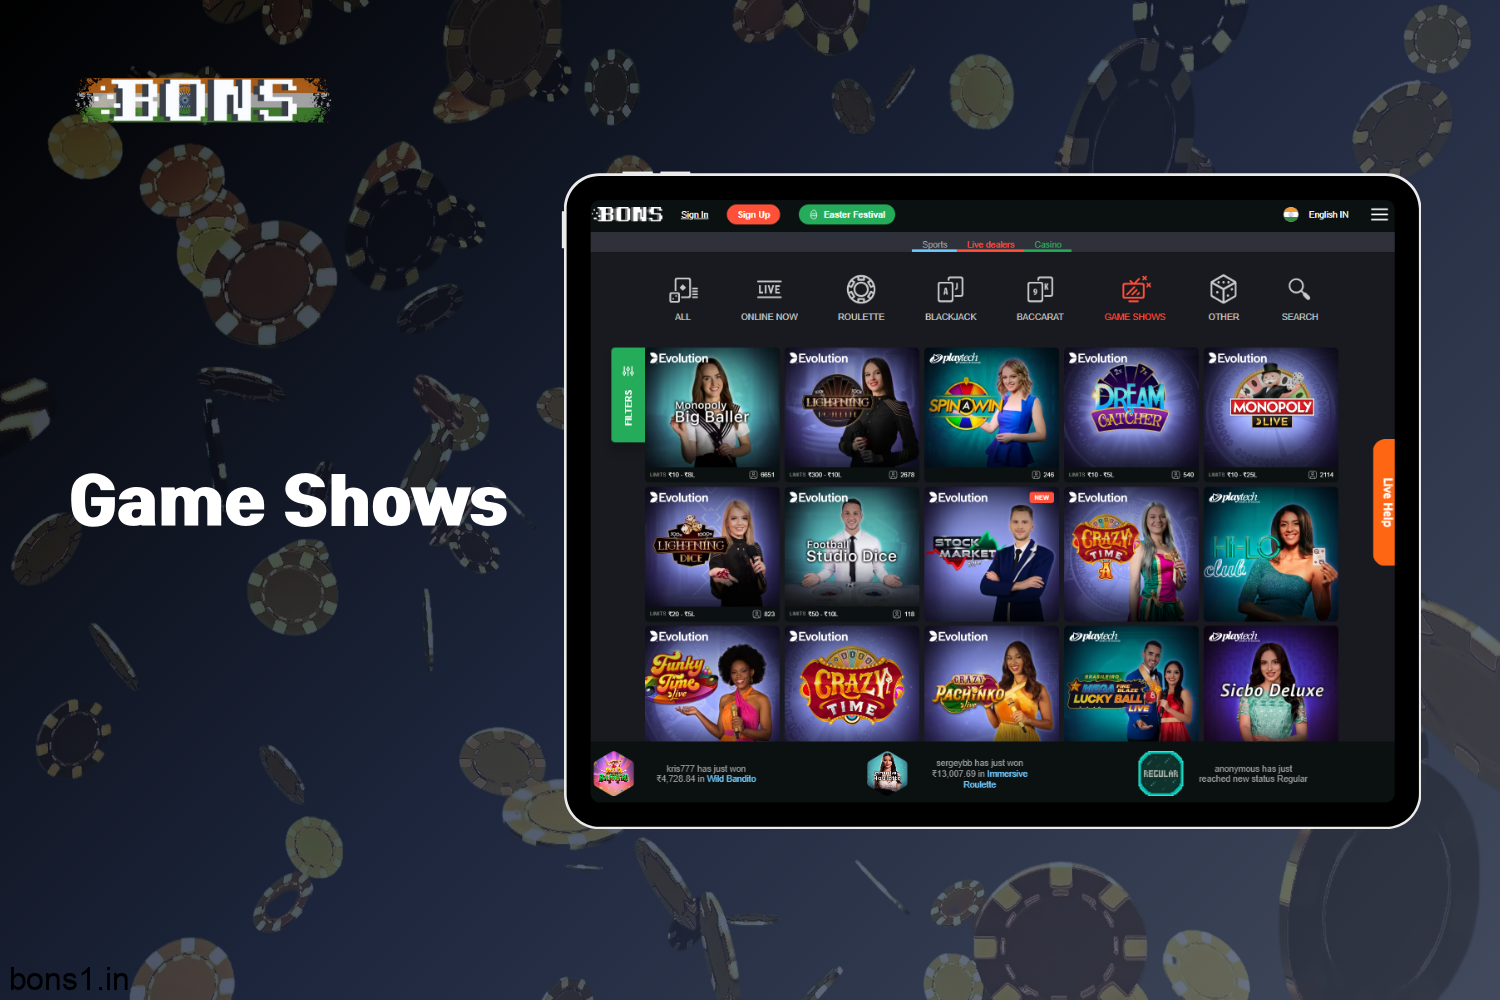 Bons Casino's Live Casino section provides a wide range of game shows for players from India